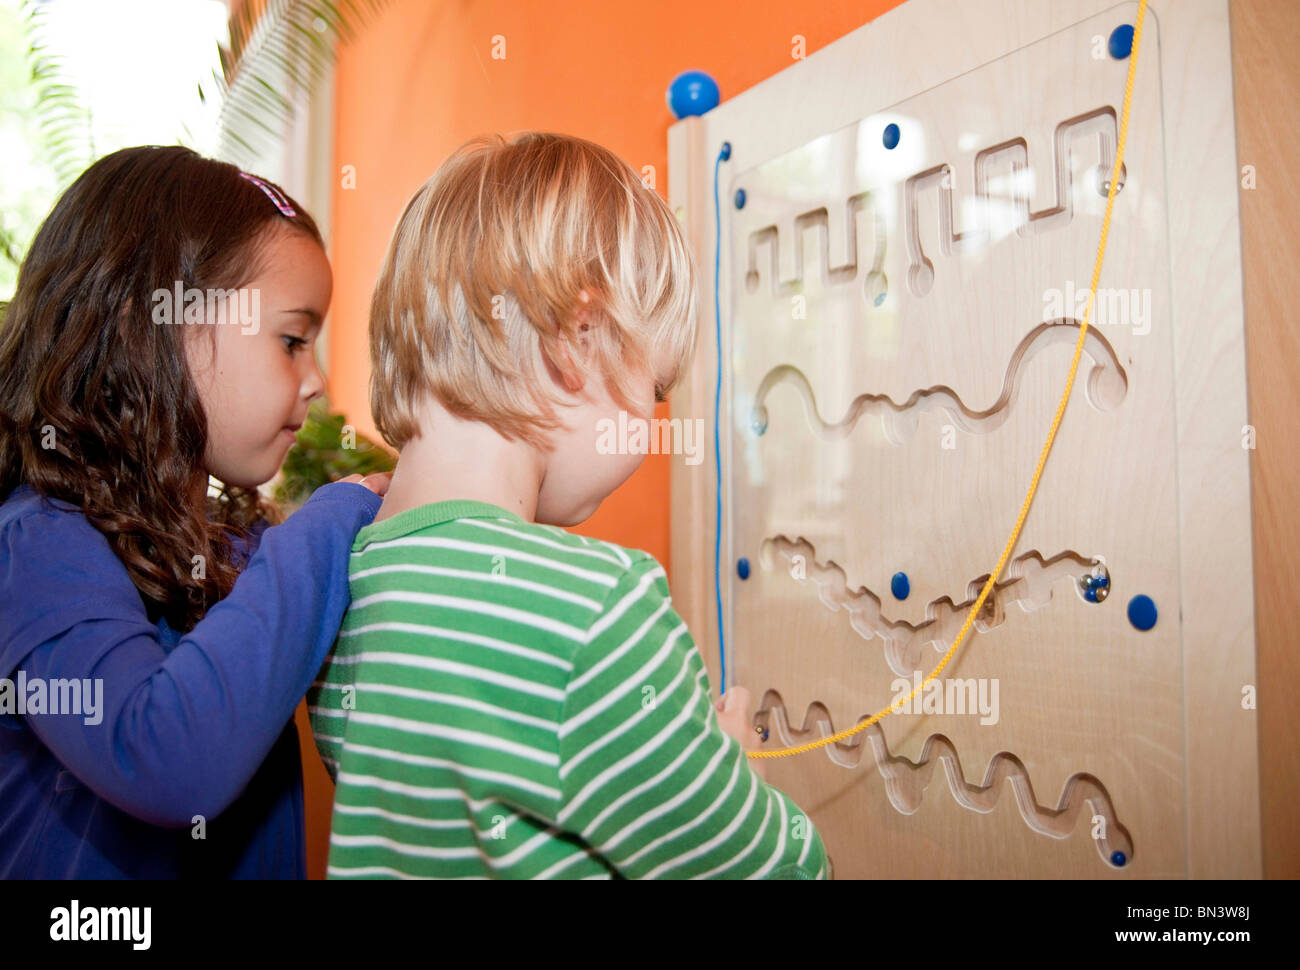 Young boy and girl playing in a kindergarten, low angle view Stock Photo